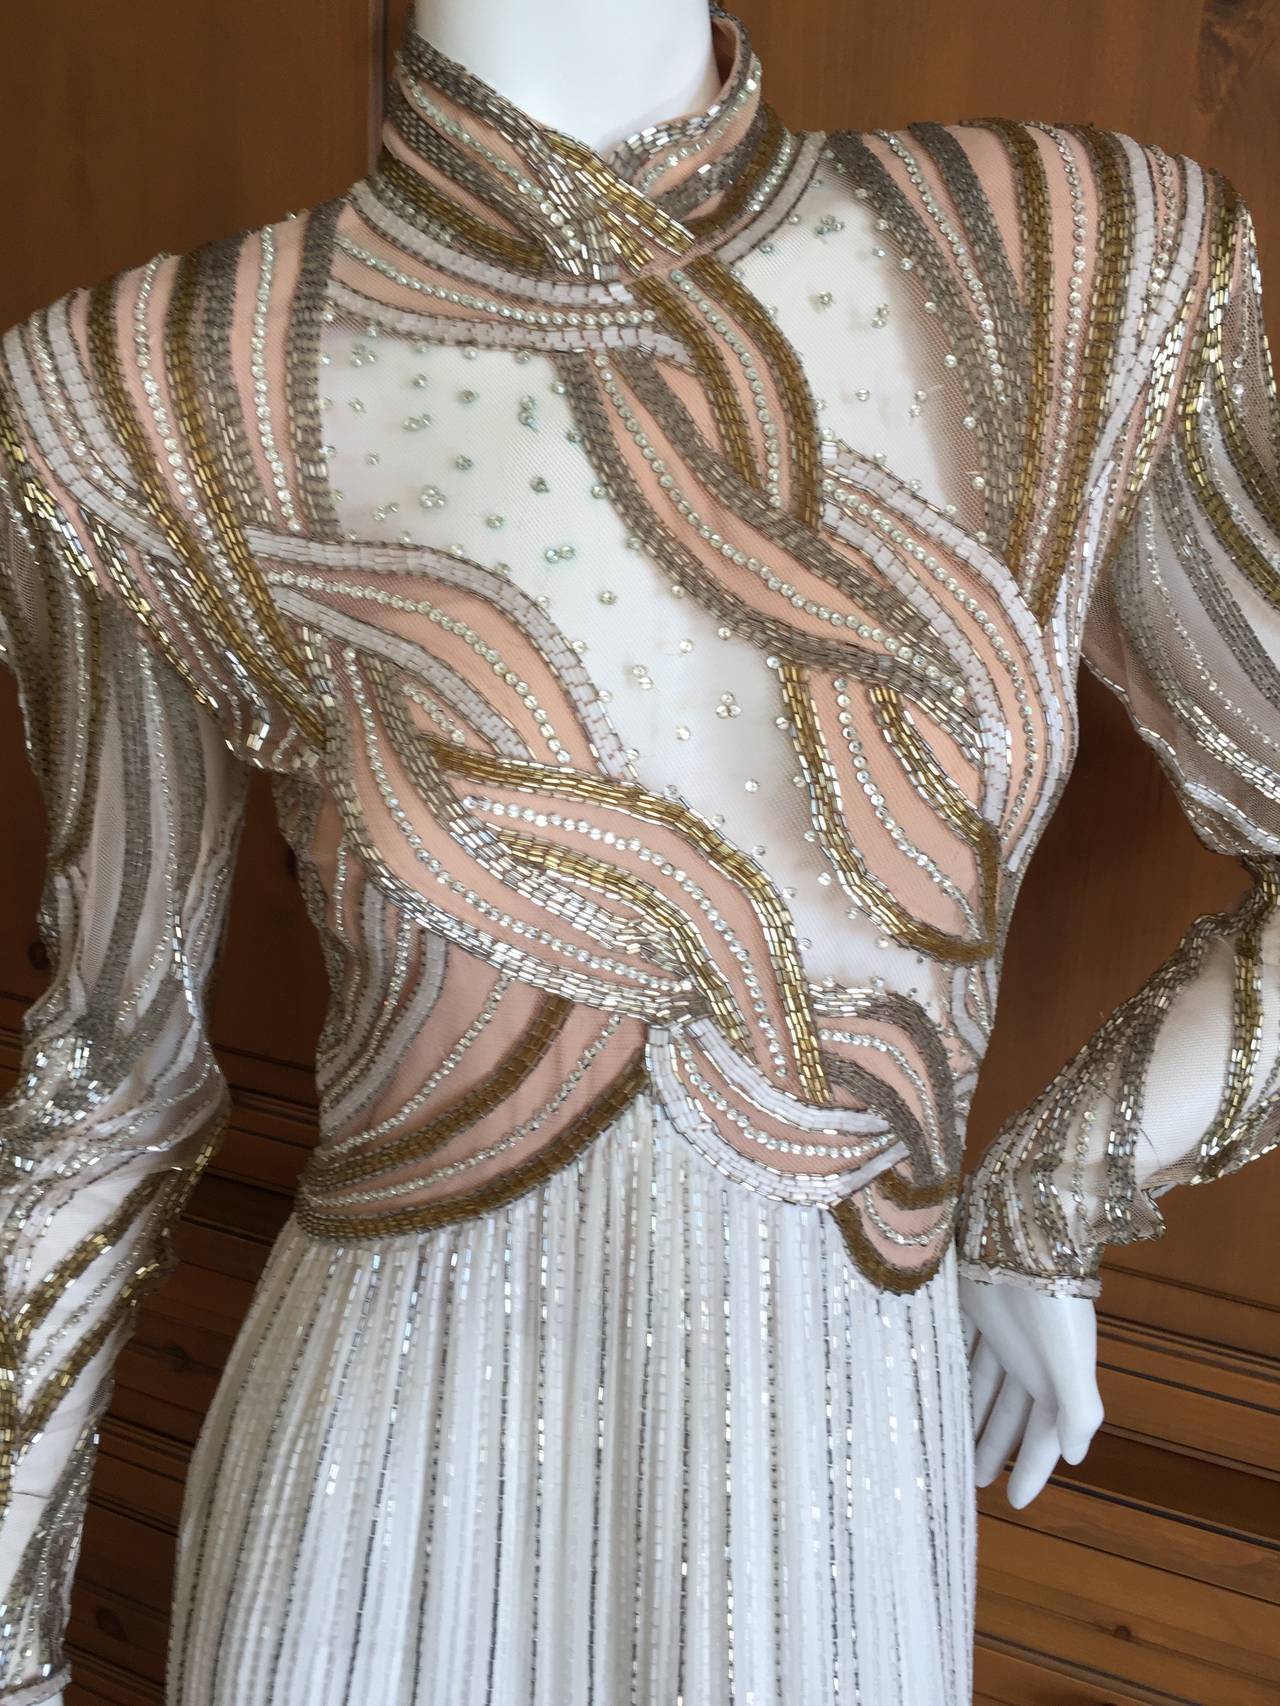 Bob Mackie Sheer Illusion 1970's Beaded Gown.
This is Mackie at his best, with sheer sections showing skin, and all the delicious beadwork in gold , silver and crystal.
I would estimate this at size 4 in todays sizing.
Bust 36